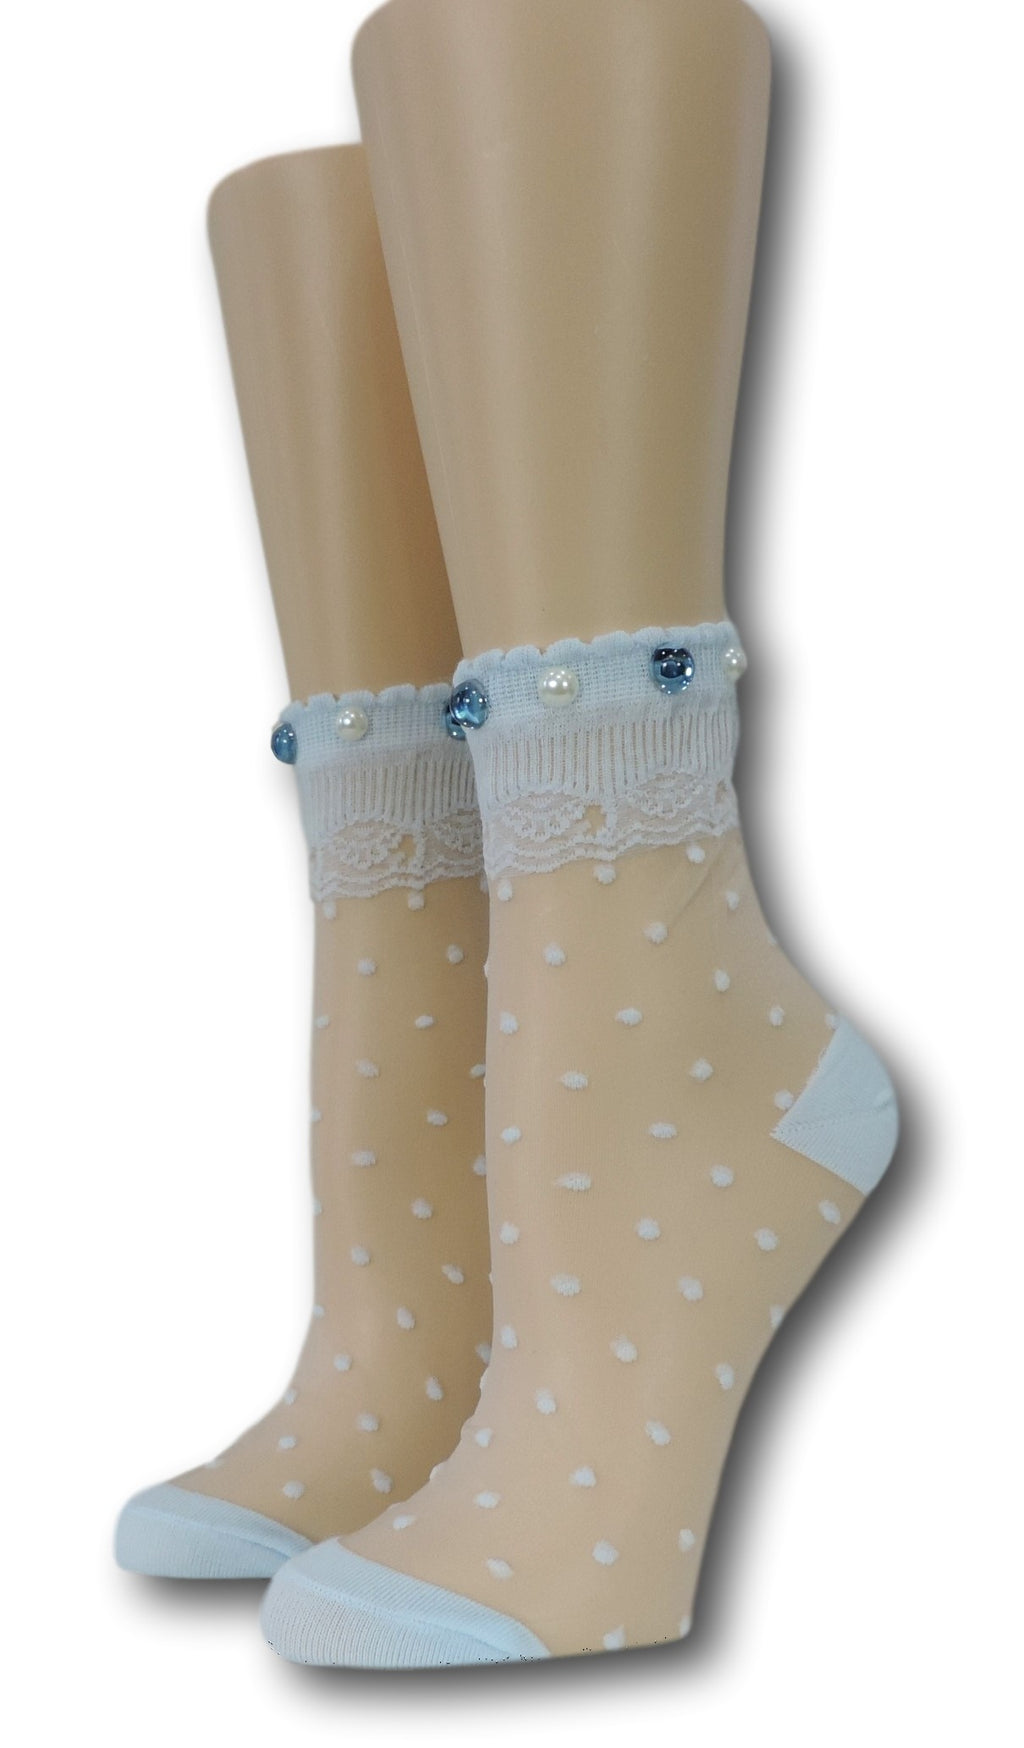 Polka Dotted Sheer Socks with beads